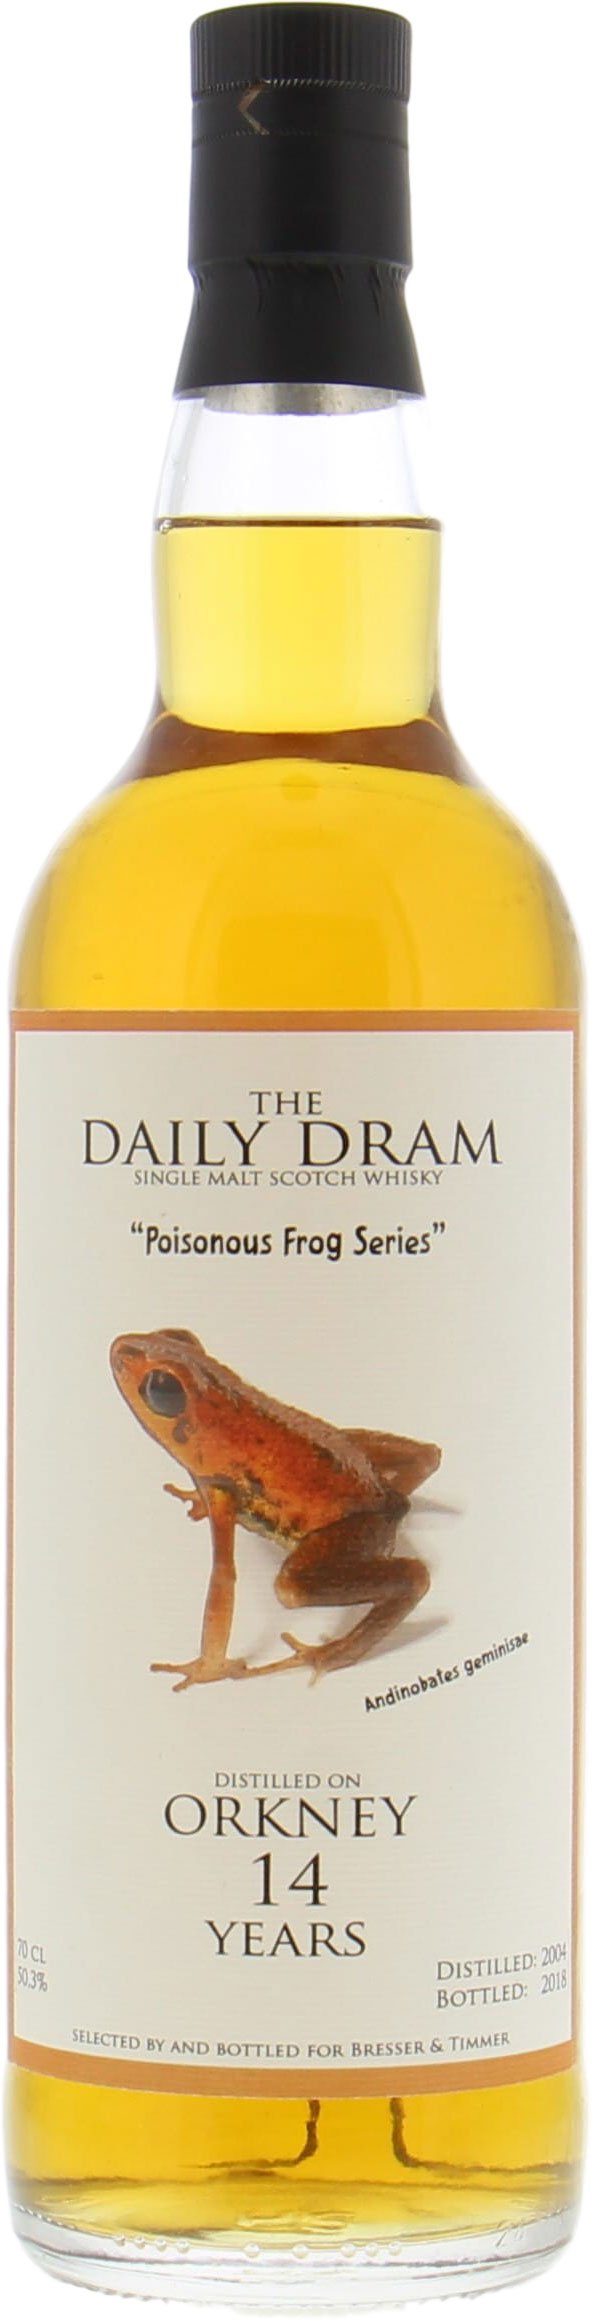 Daily Dram - Orkney 14 Years Old Poisonous Frog 50.3% 2004 Perfect